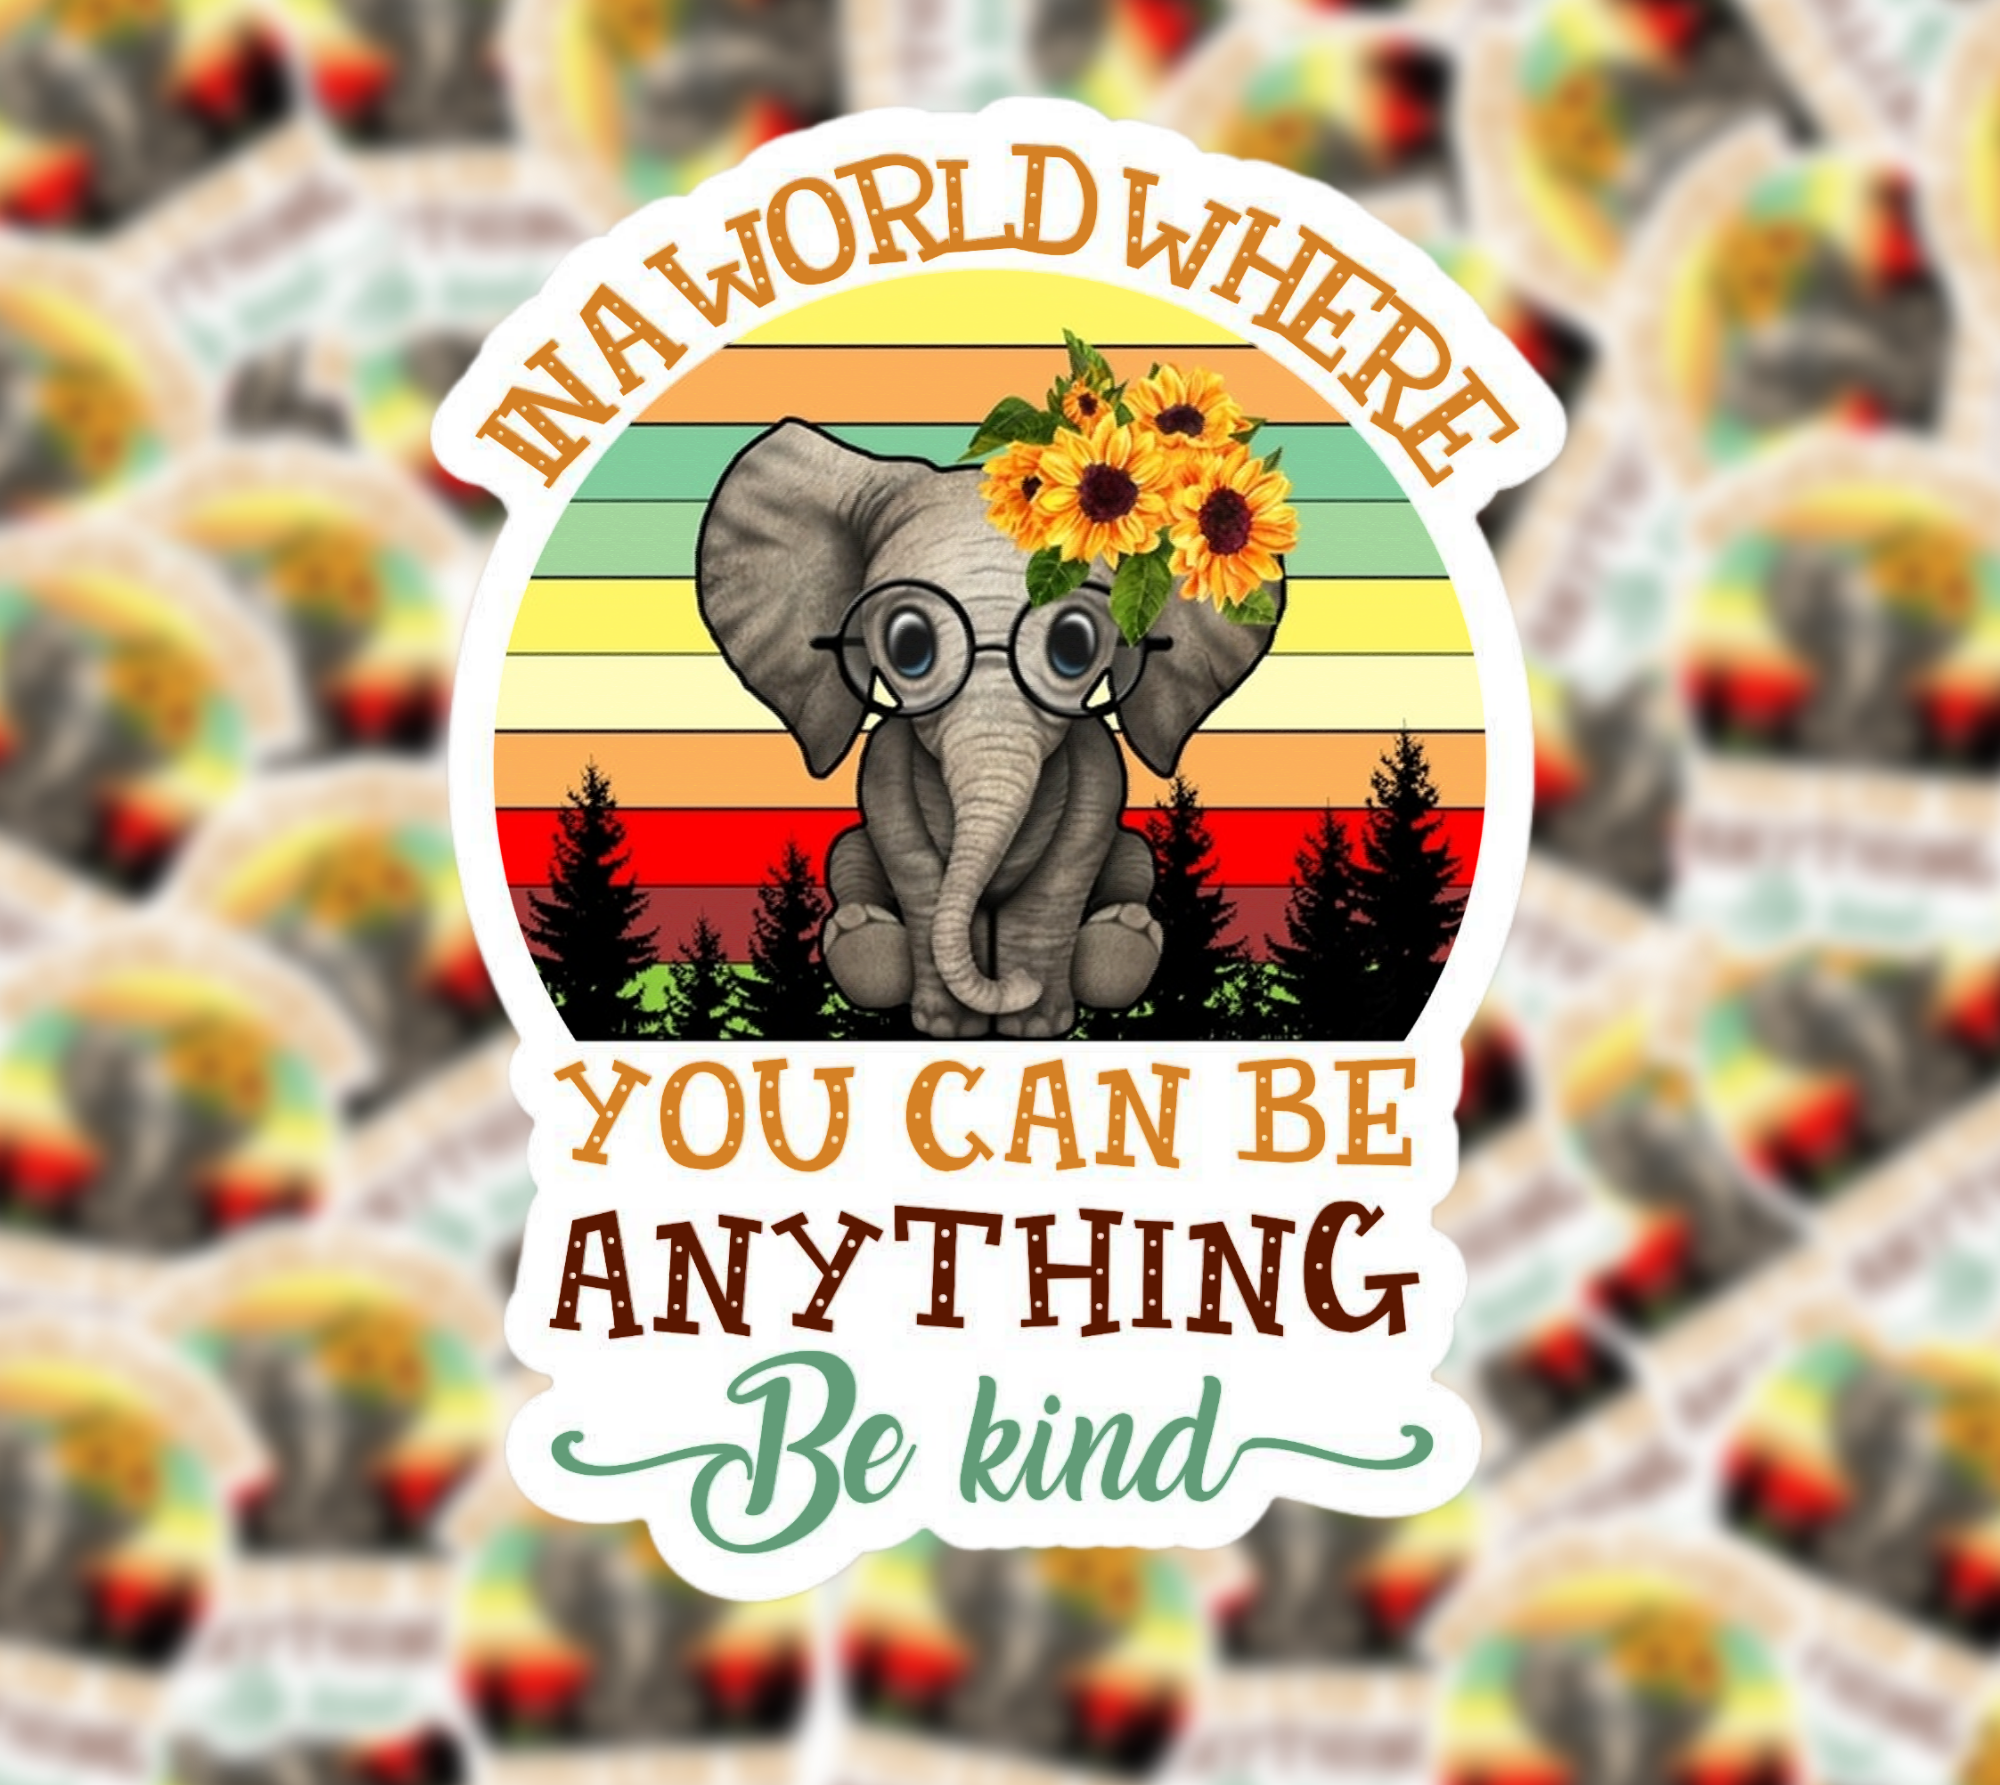 In a World Where You can be anything, be kind.  This cute elephant with glasses and sunflowers sits in front of a retro sunset background.